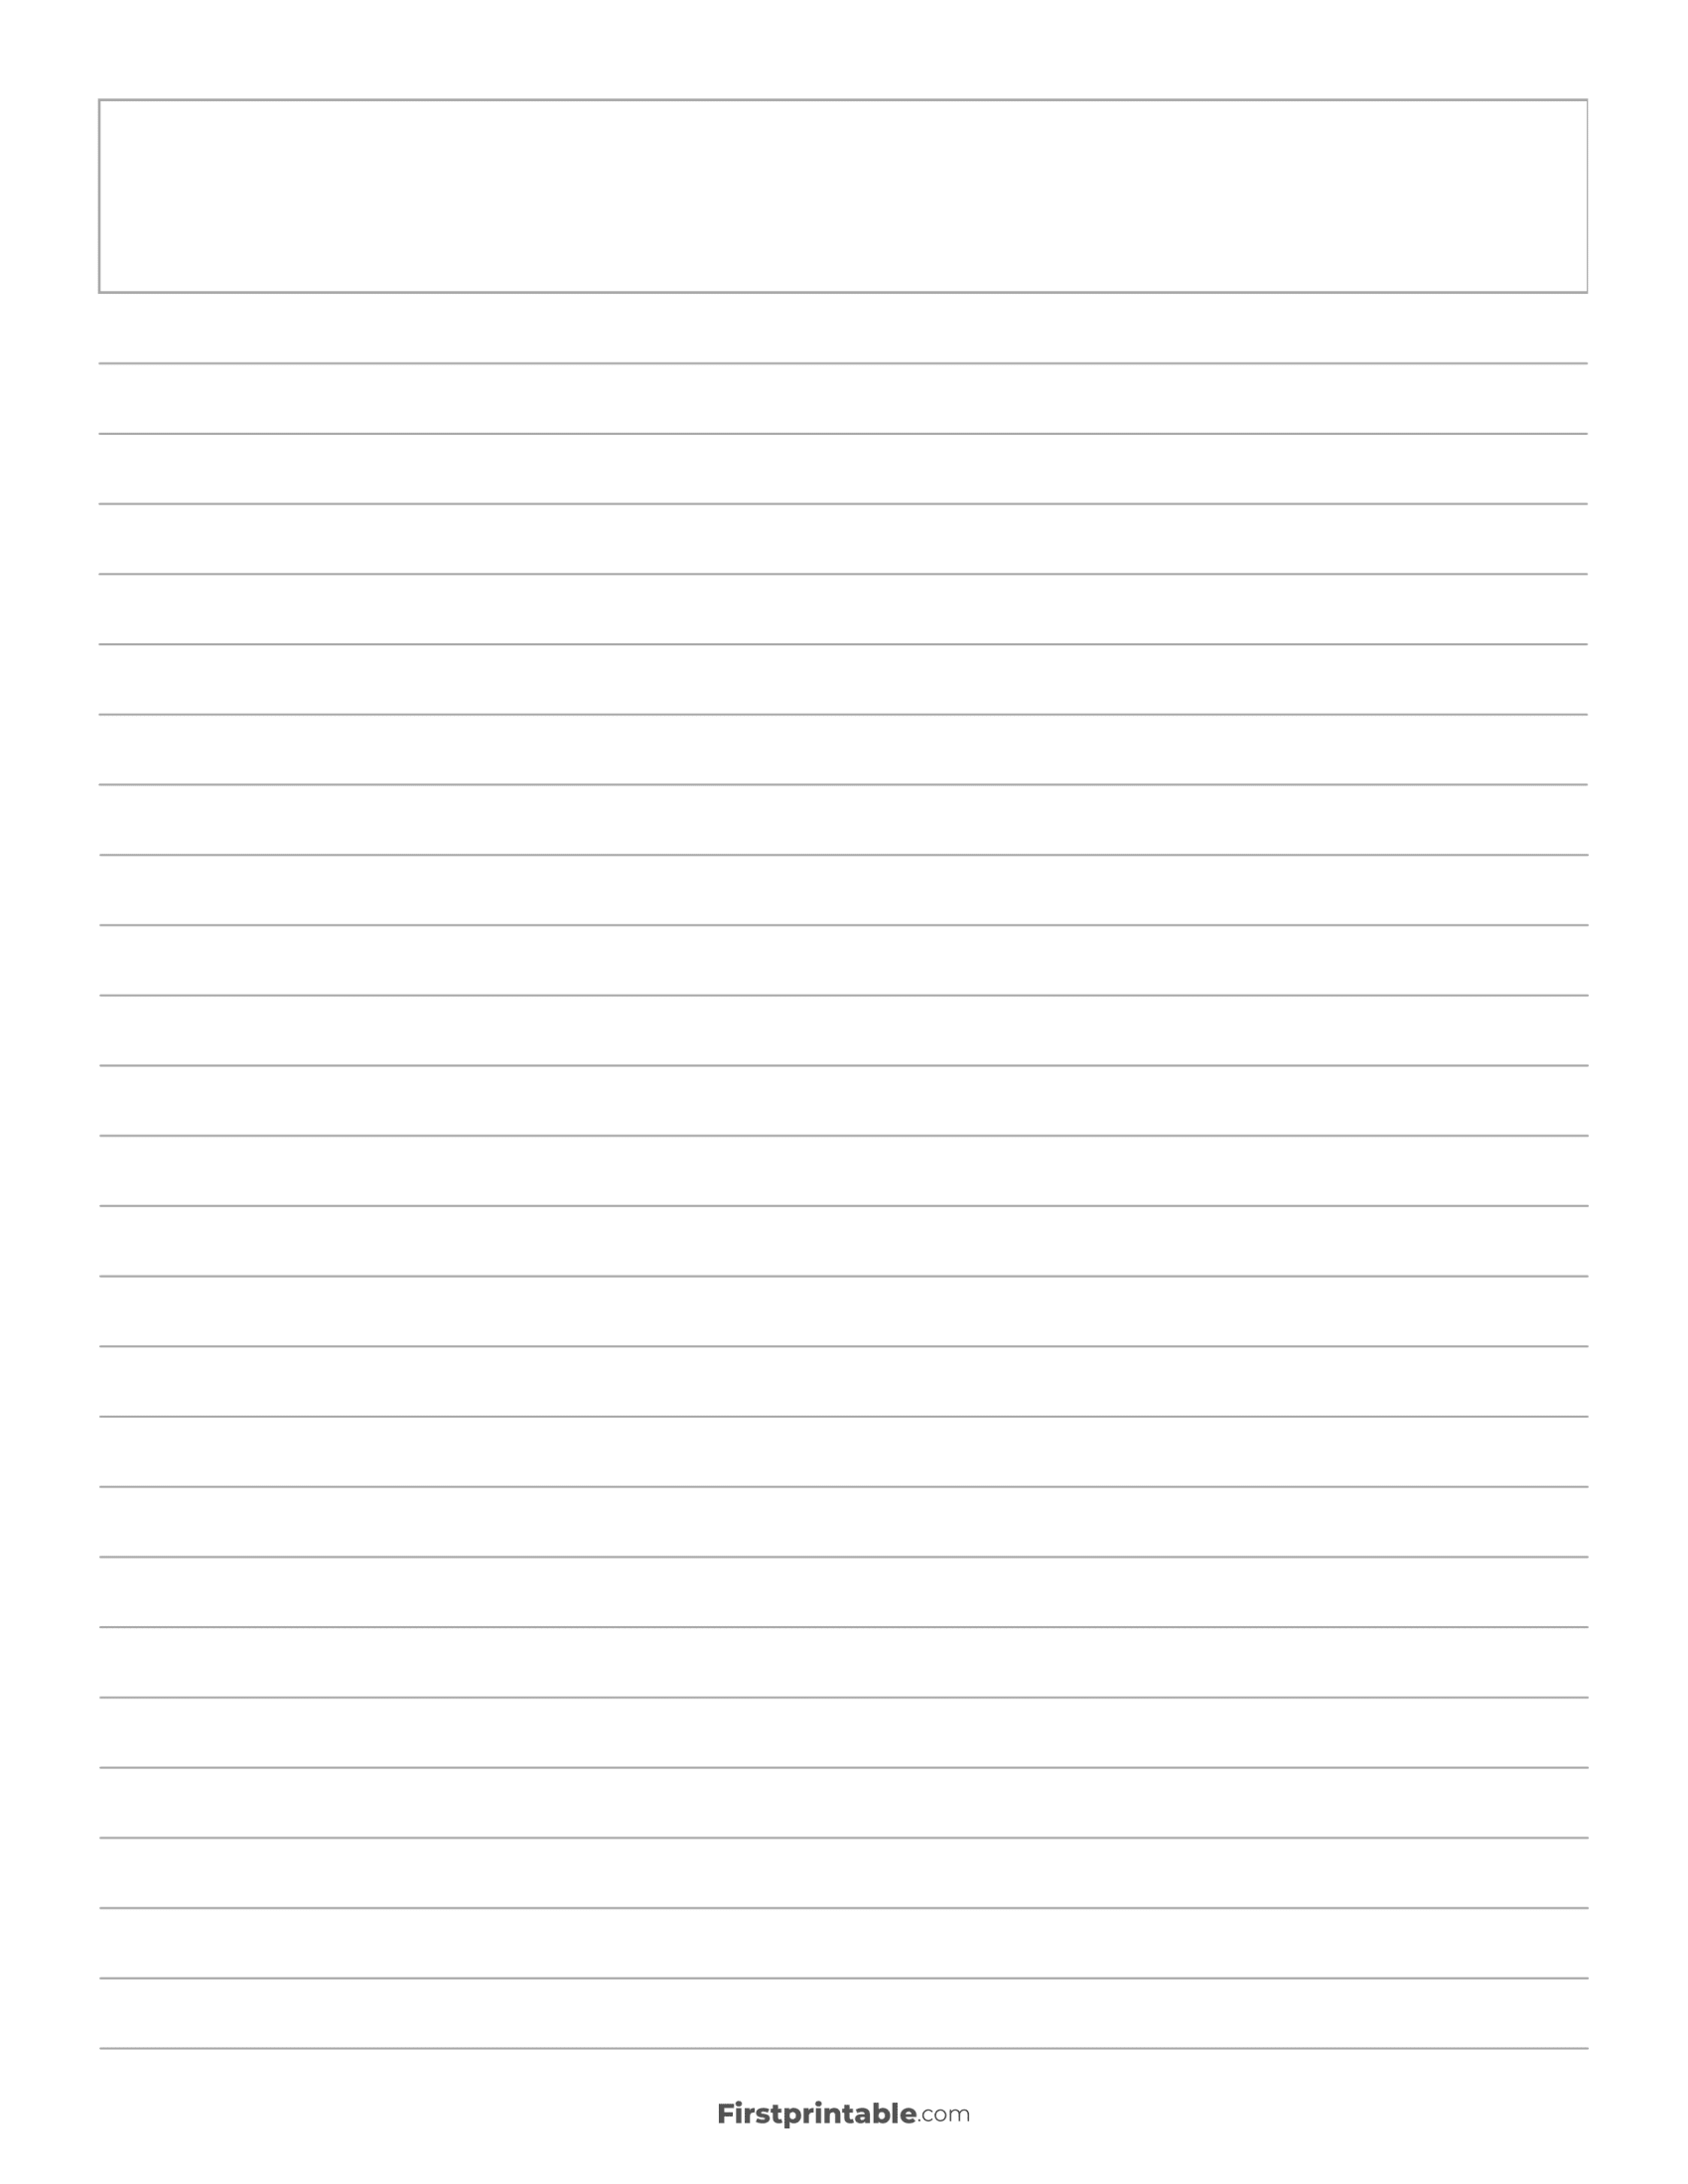 Printable Lined Paper Template - Wide Ruled with Title